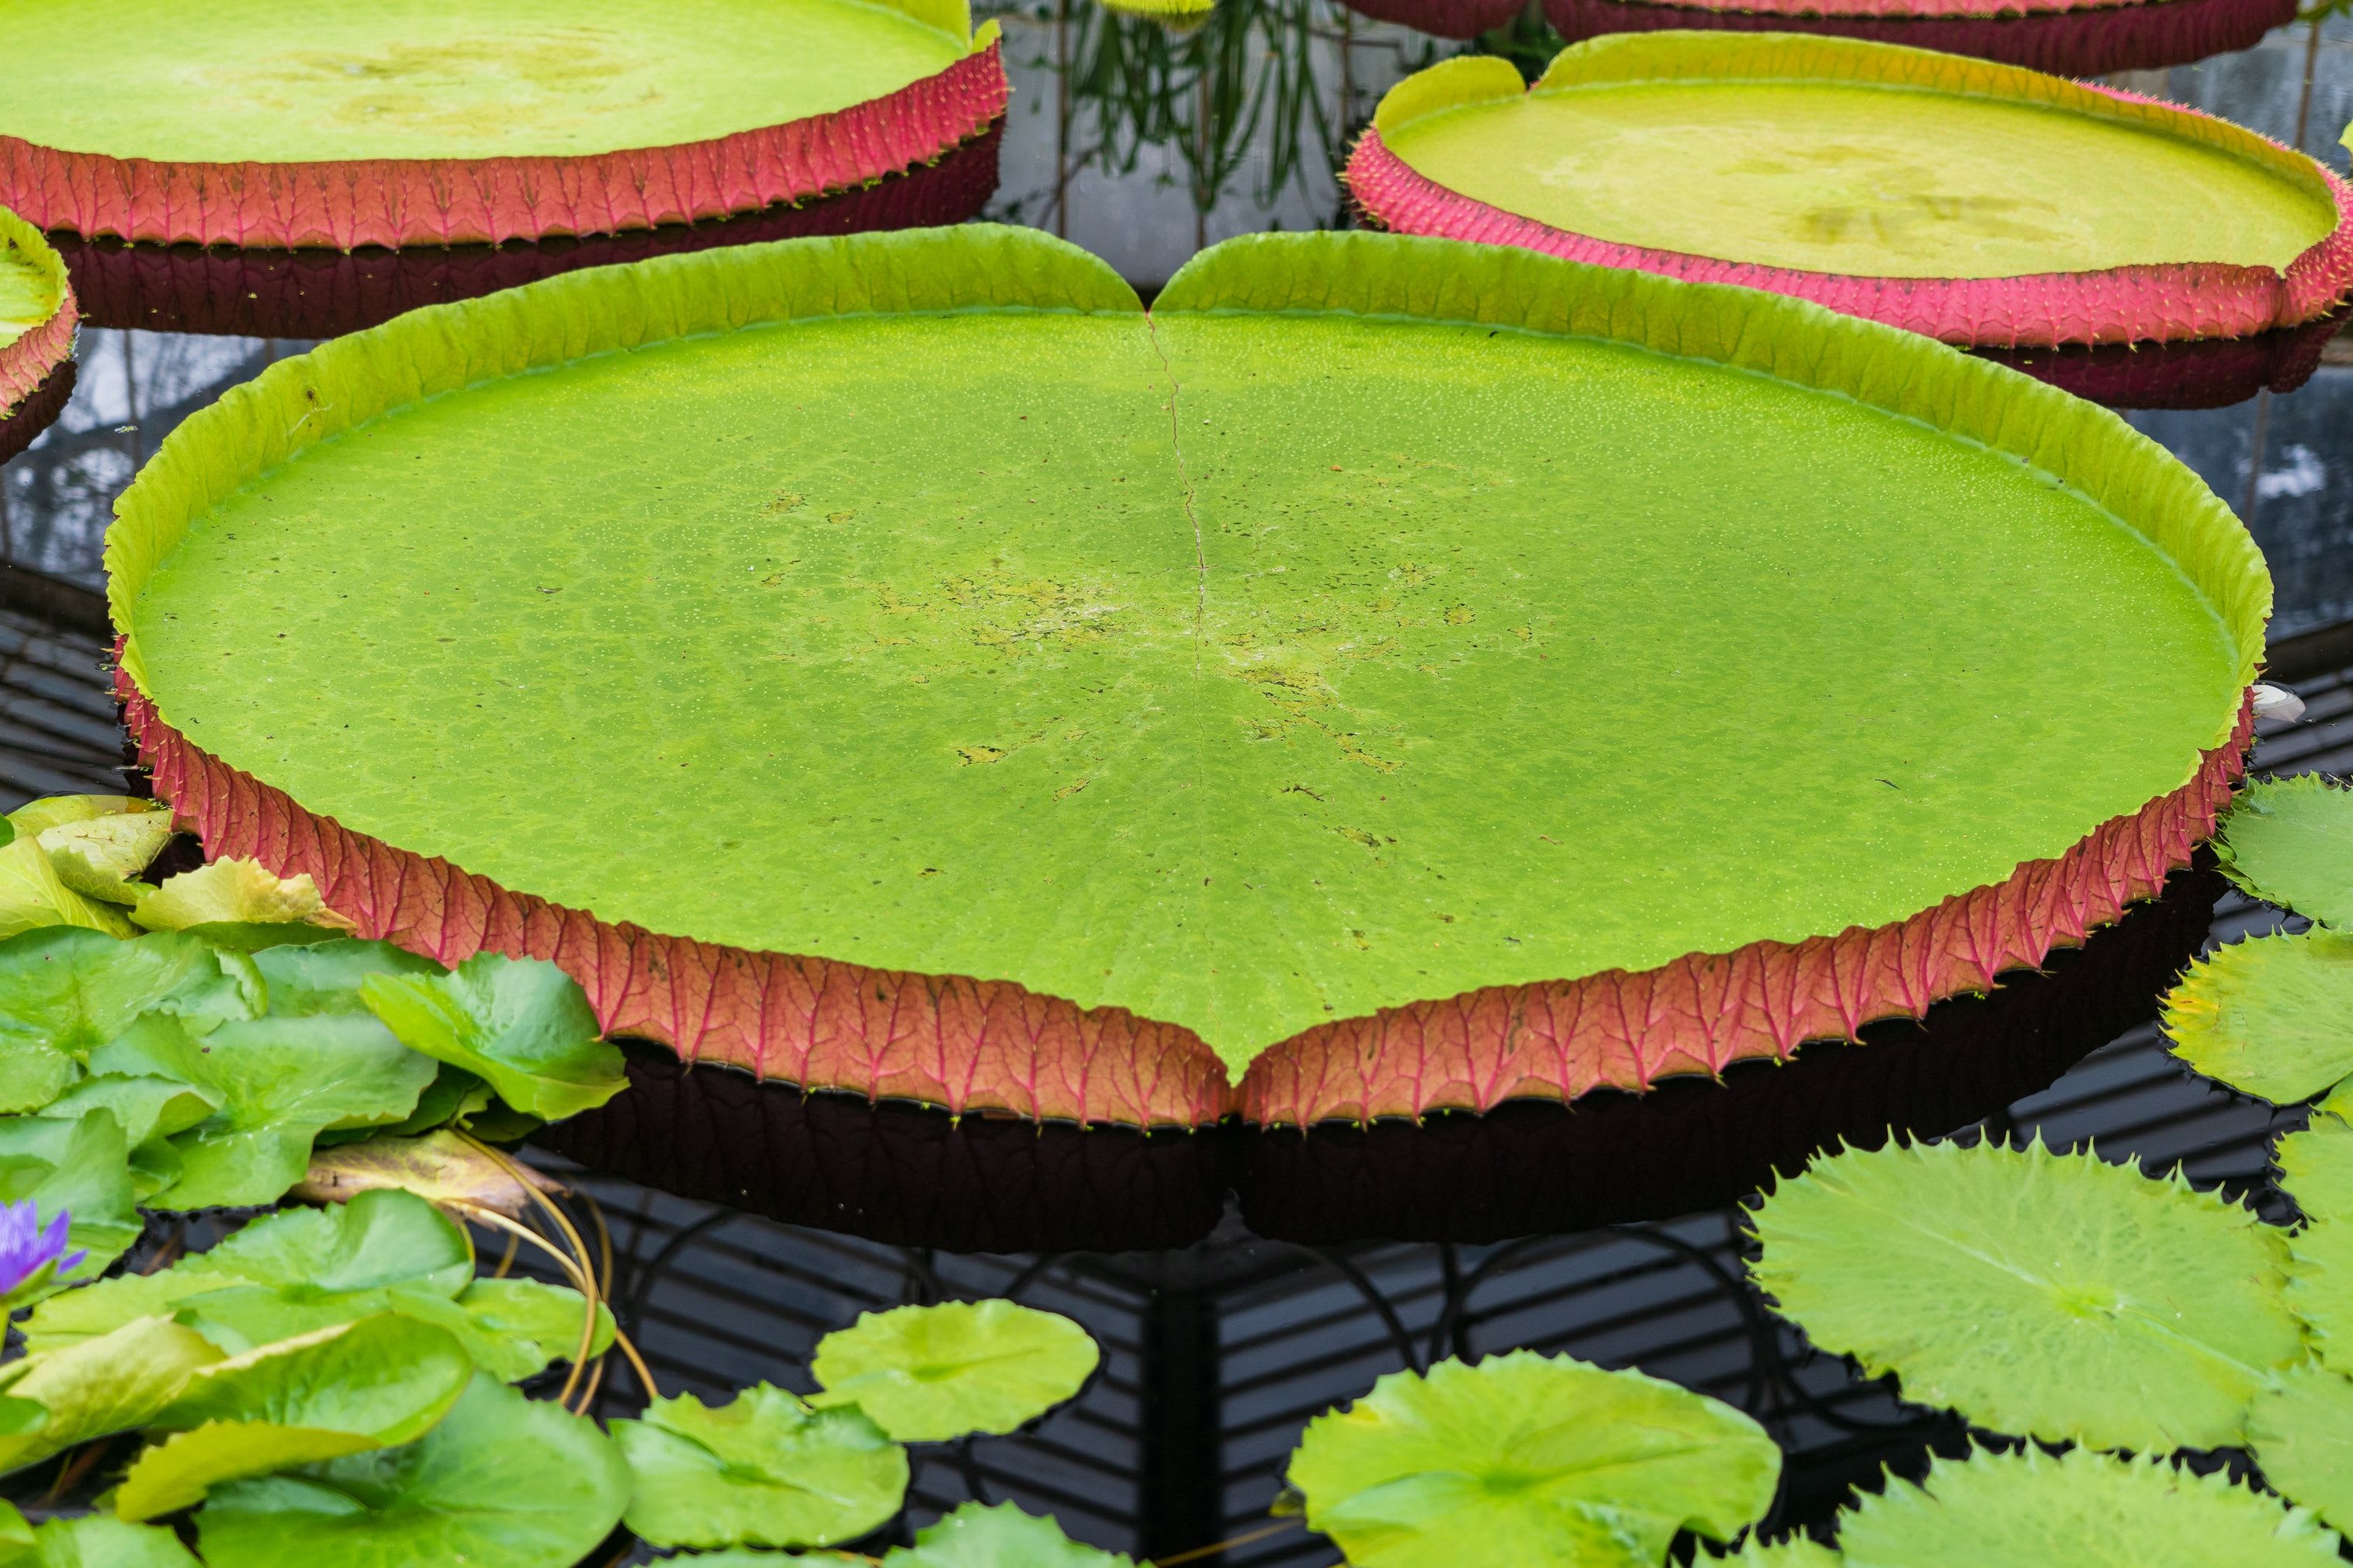 World’s largest species of water lily discovered in... London?!